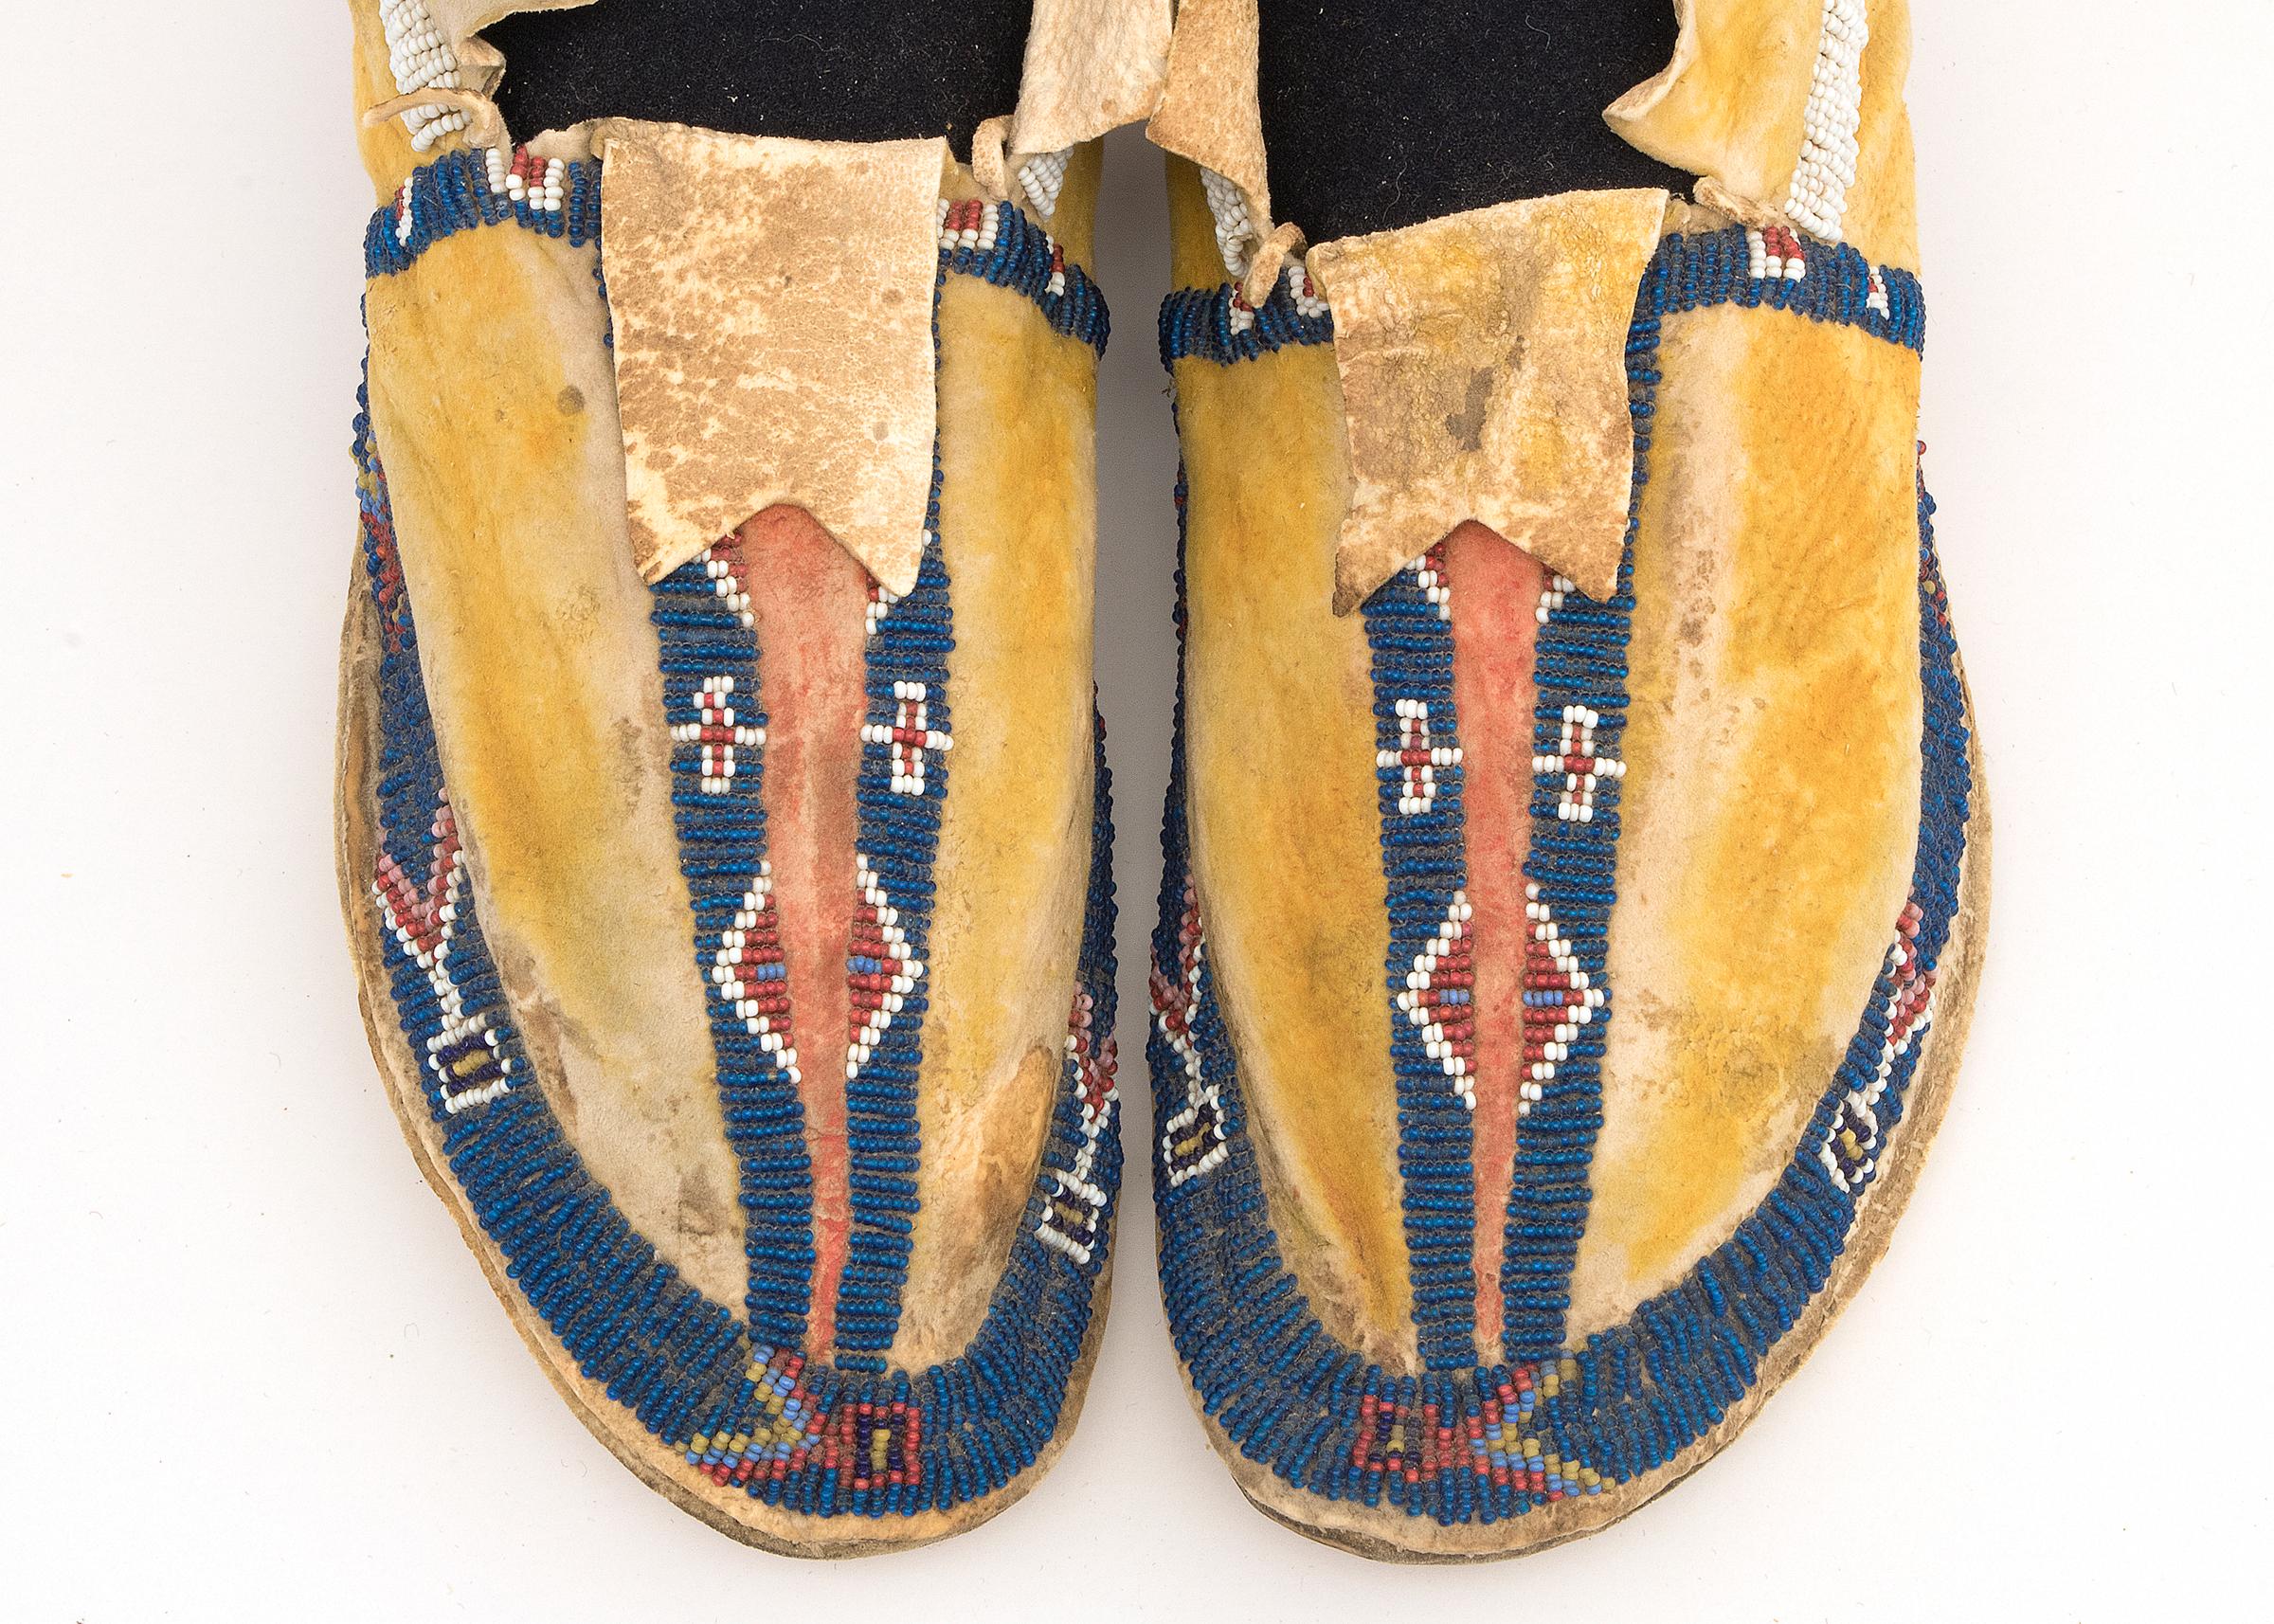 Circa 1880s Cheyenne moccasins measuring 9 ¾ x 3 x 2 ¾ inches. Decorative elements include beads and dyes in bright yellow, blue, and orange. 

 